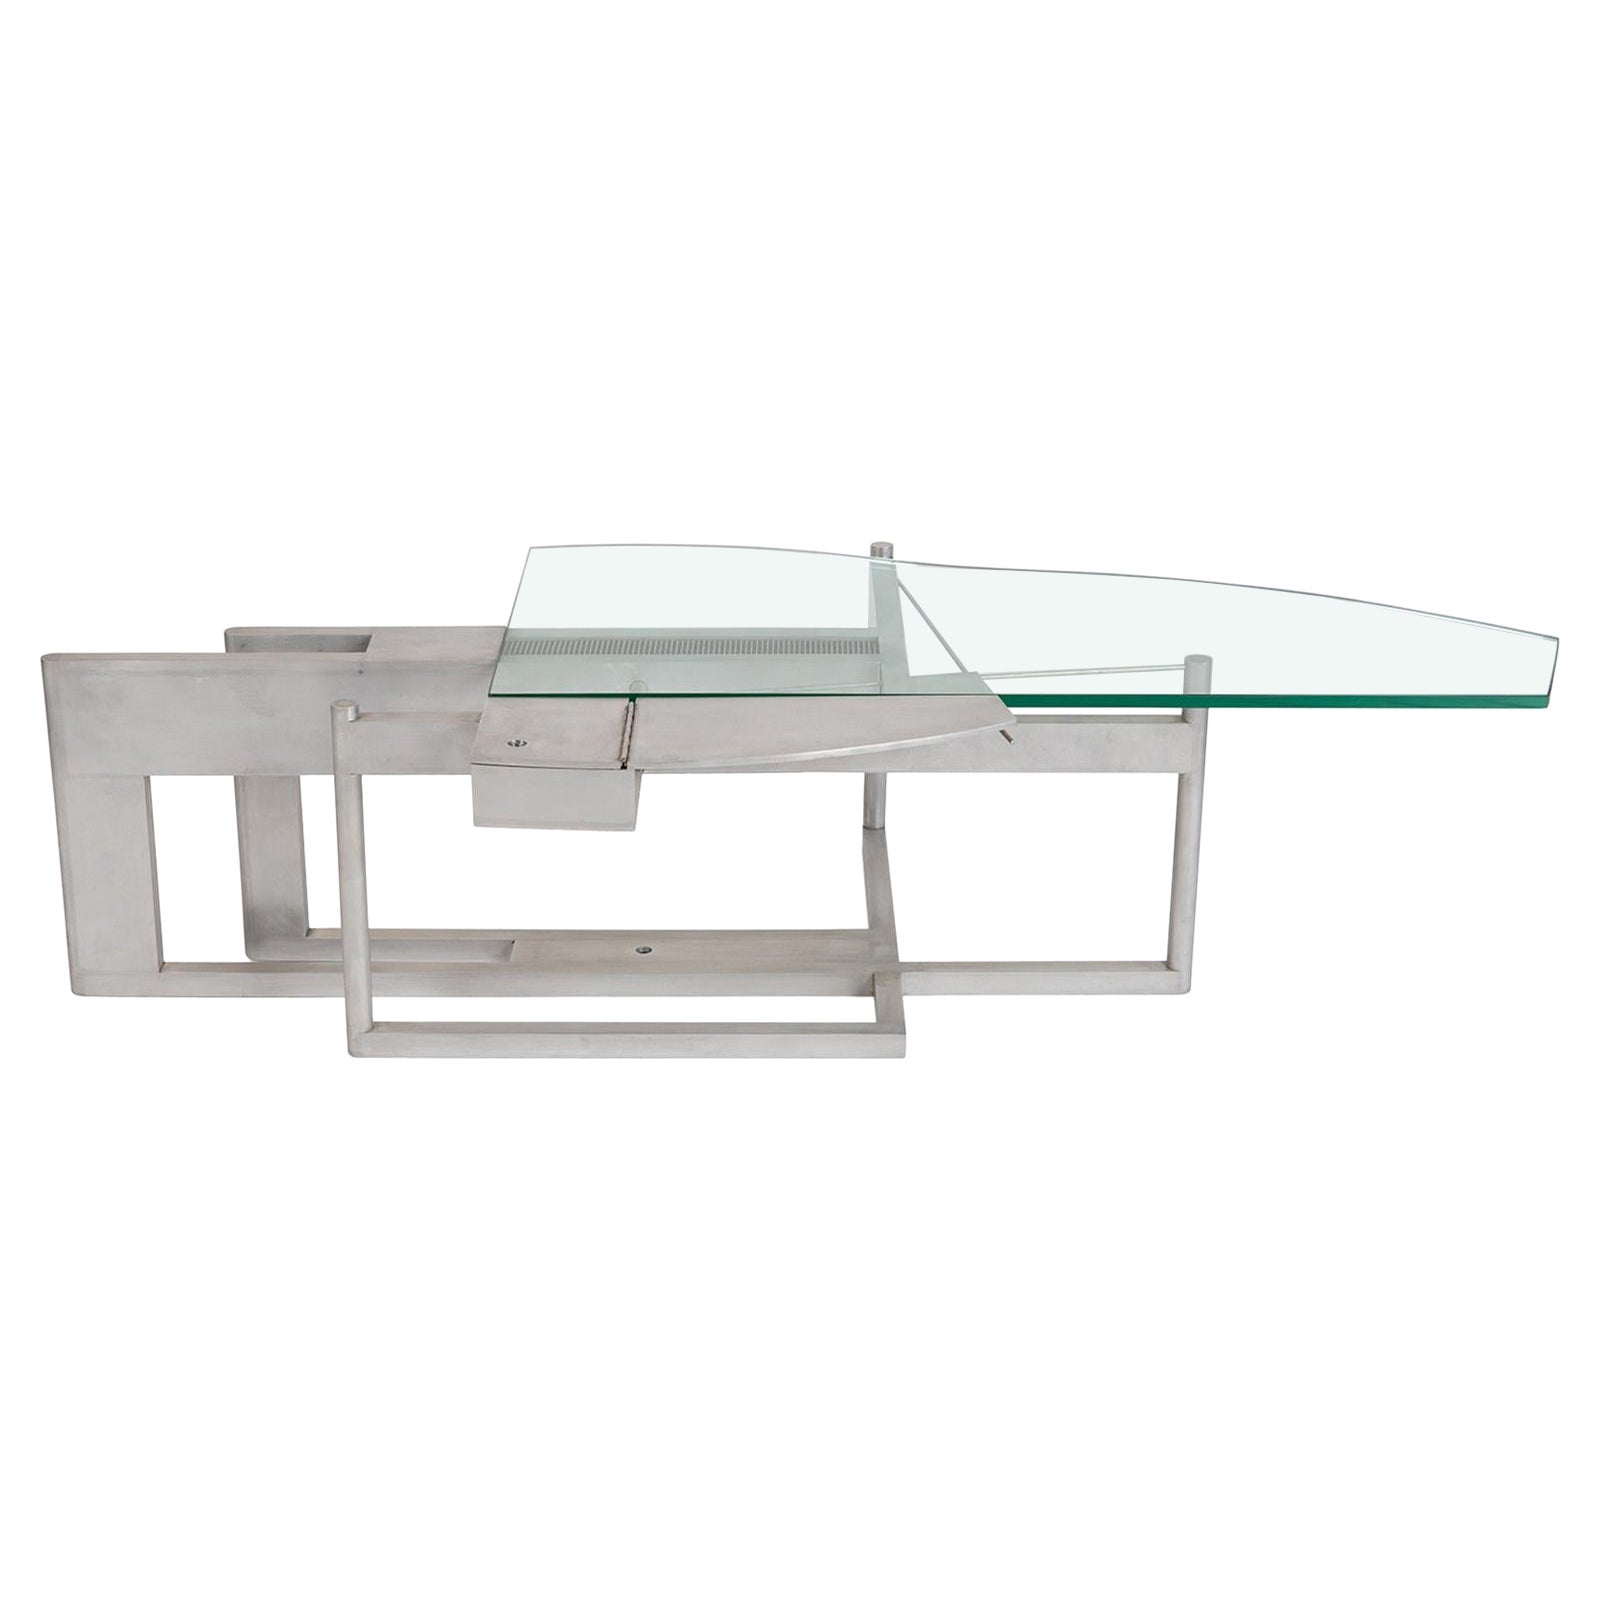 Architectural 1980's Prototype Coffee Table by Robert Whitton For Sale